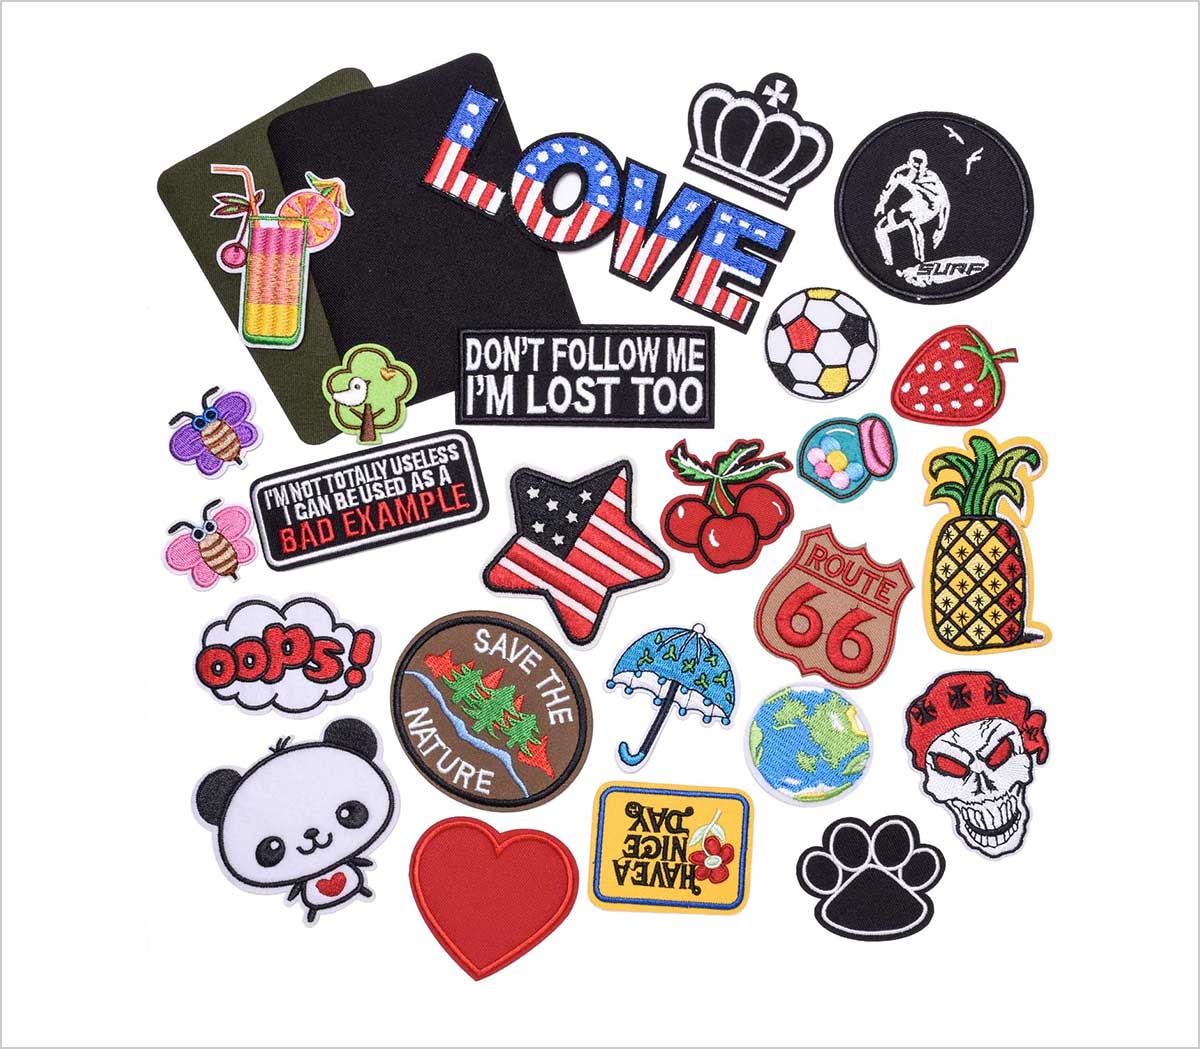 200+ Most Loved Cool Iron On Patches For Jackets, Backpacks, Jeans & Clothes  - Designbolts